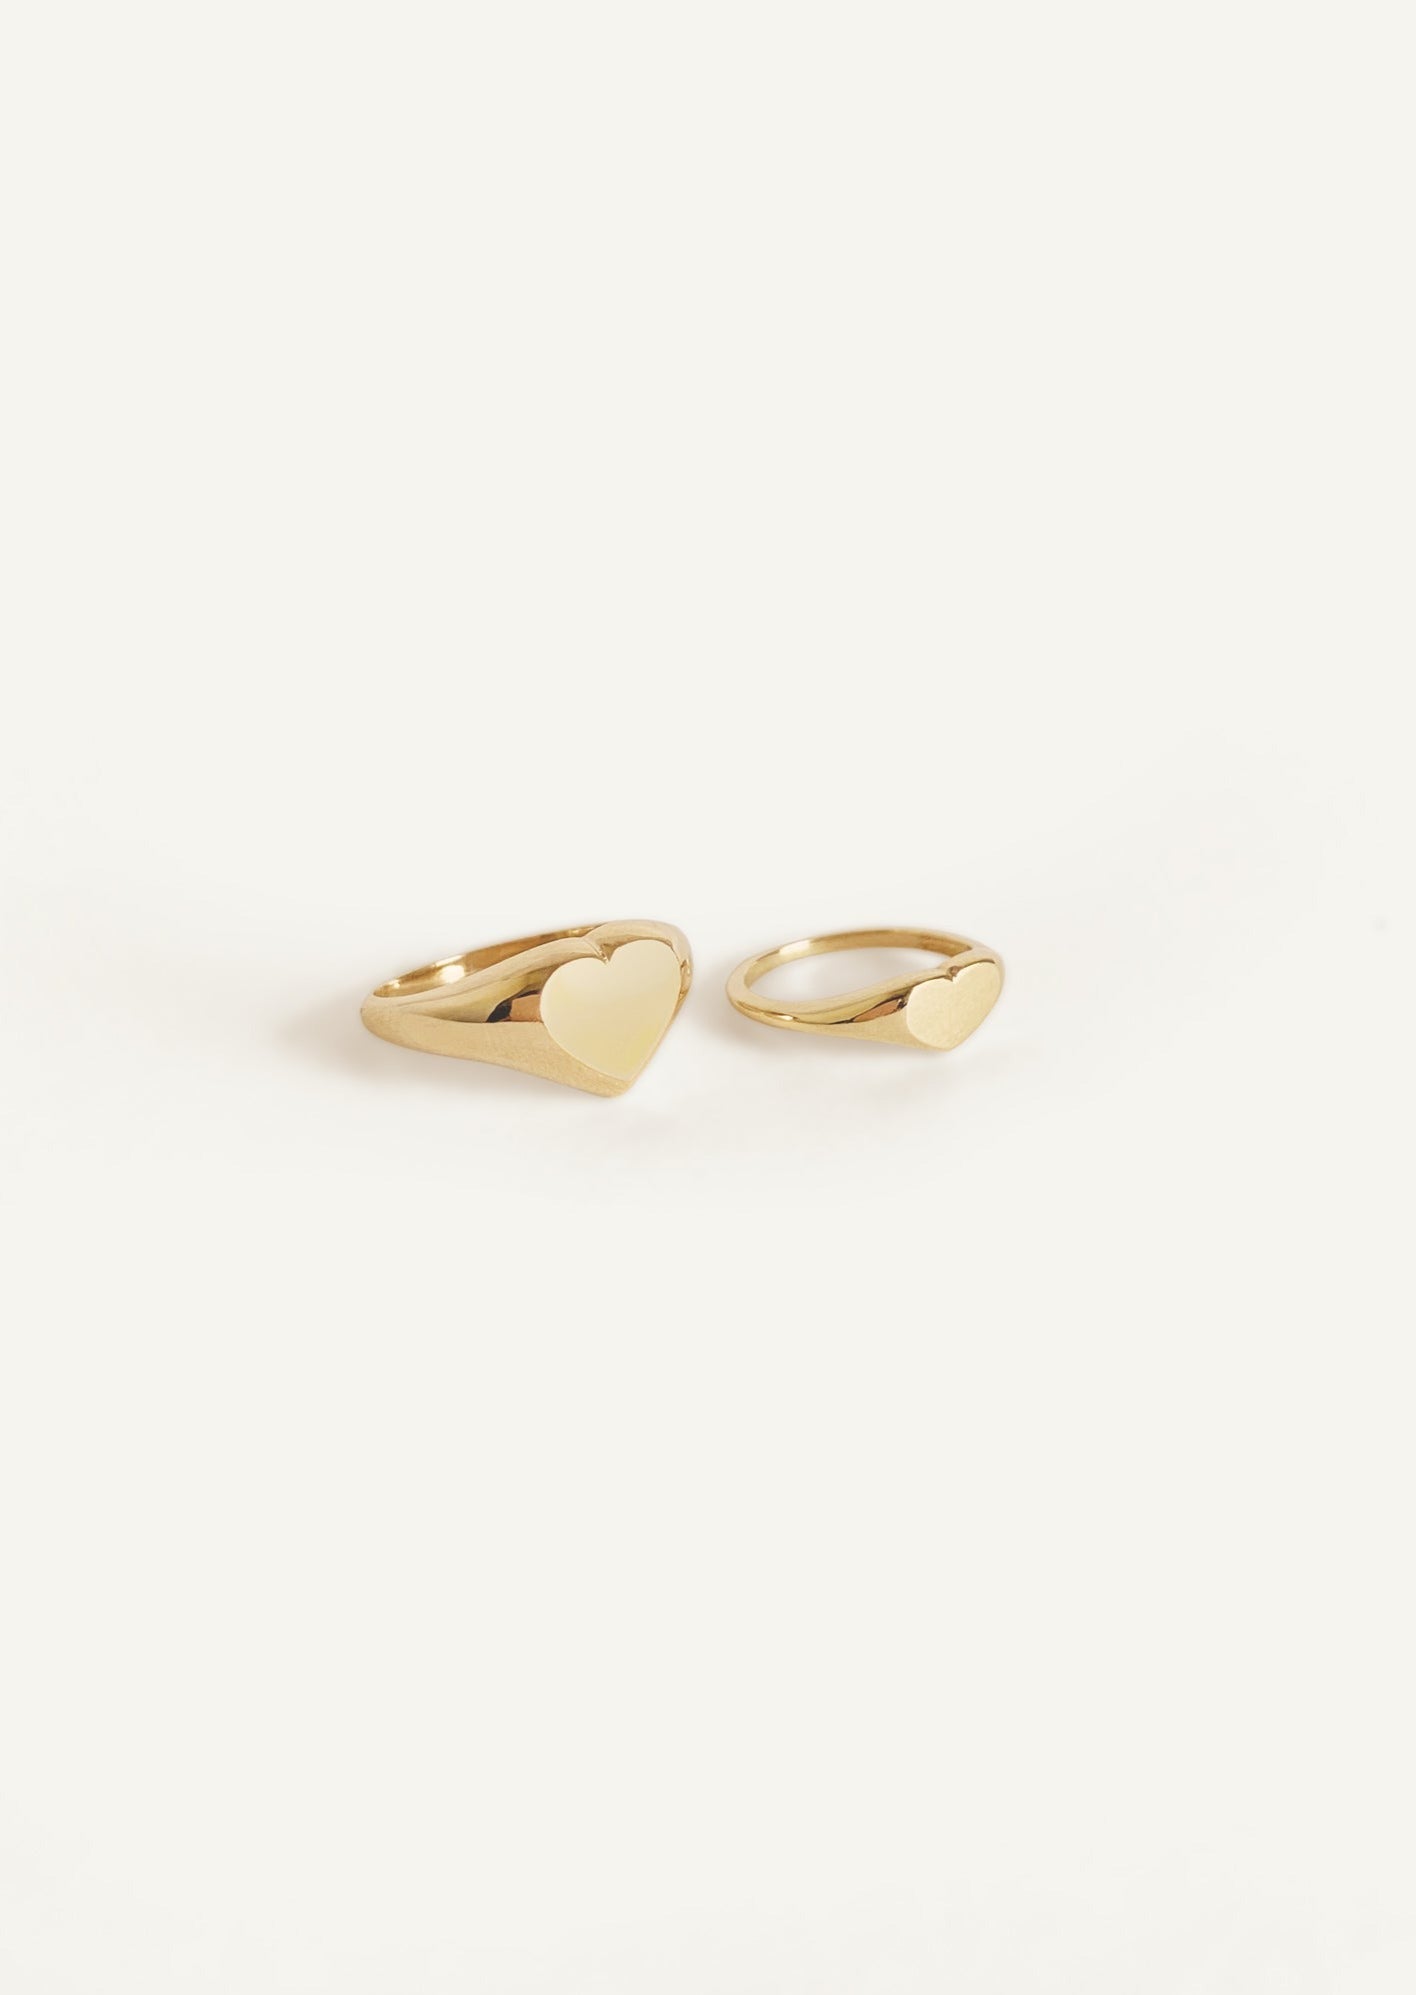 alt="Classic Heart Signet Ring compared to a petite heart signet ring"